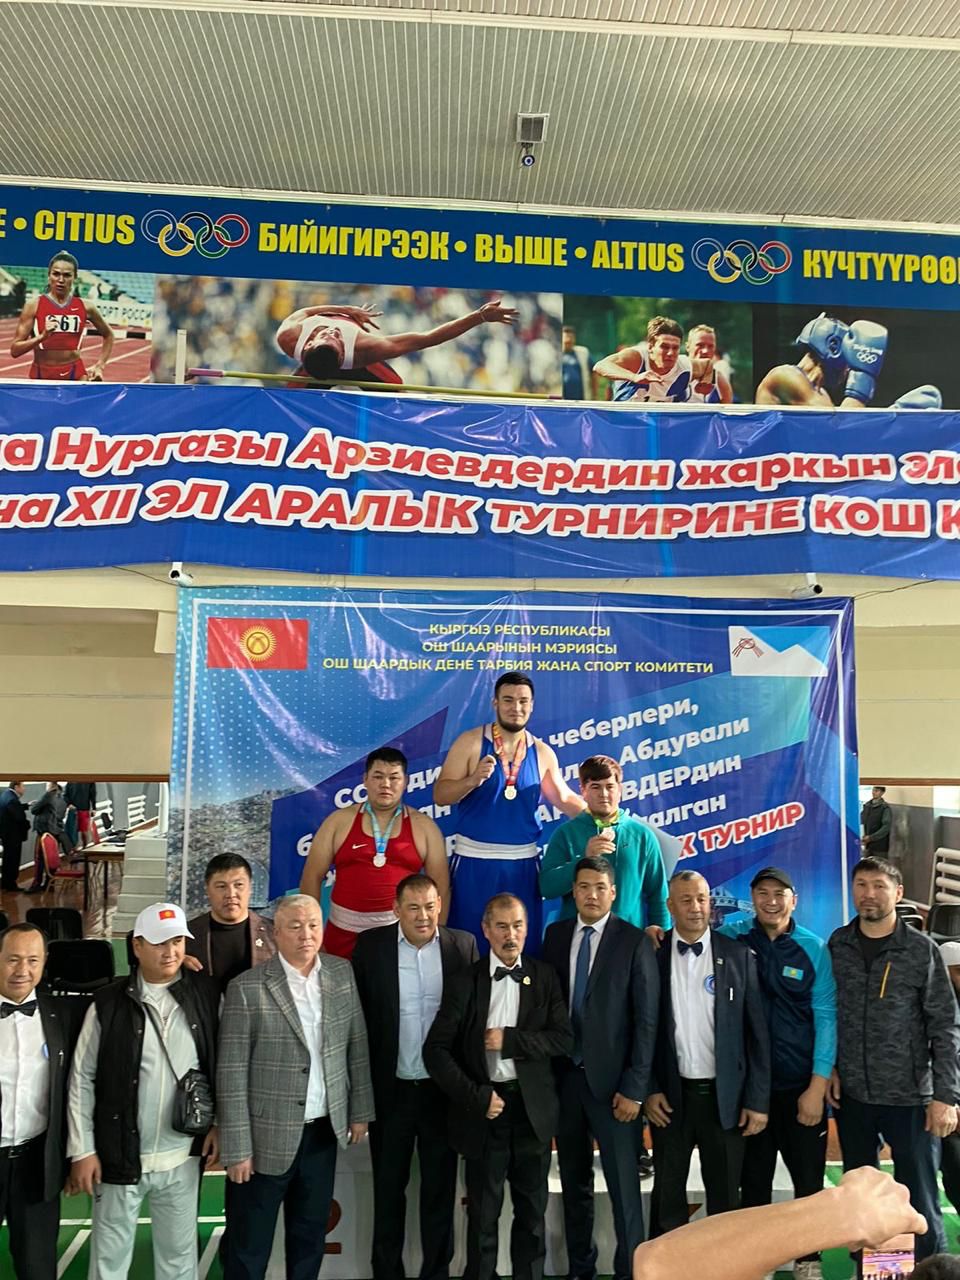 Teaching staff of the Department of Physical Education and Sports of KazNU congratulates D.Toibai on this achievement!